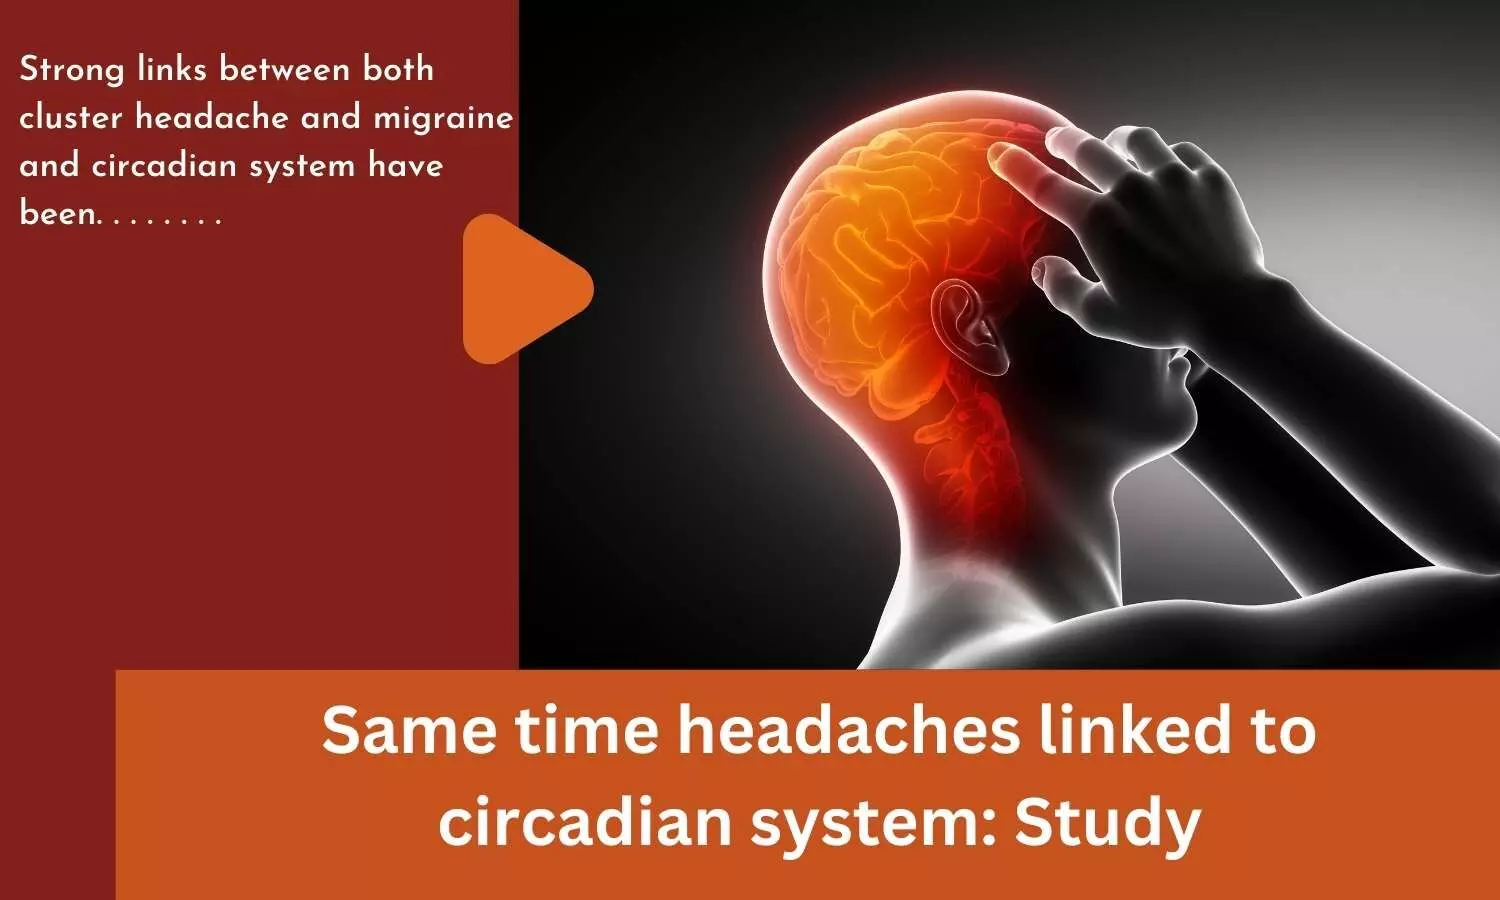 Same time headaches linked to circadian system: Study